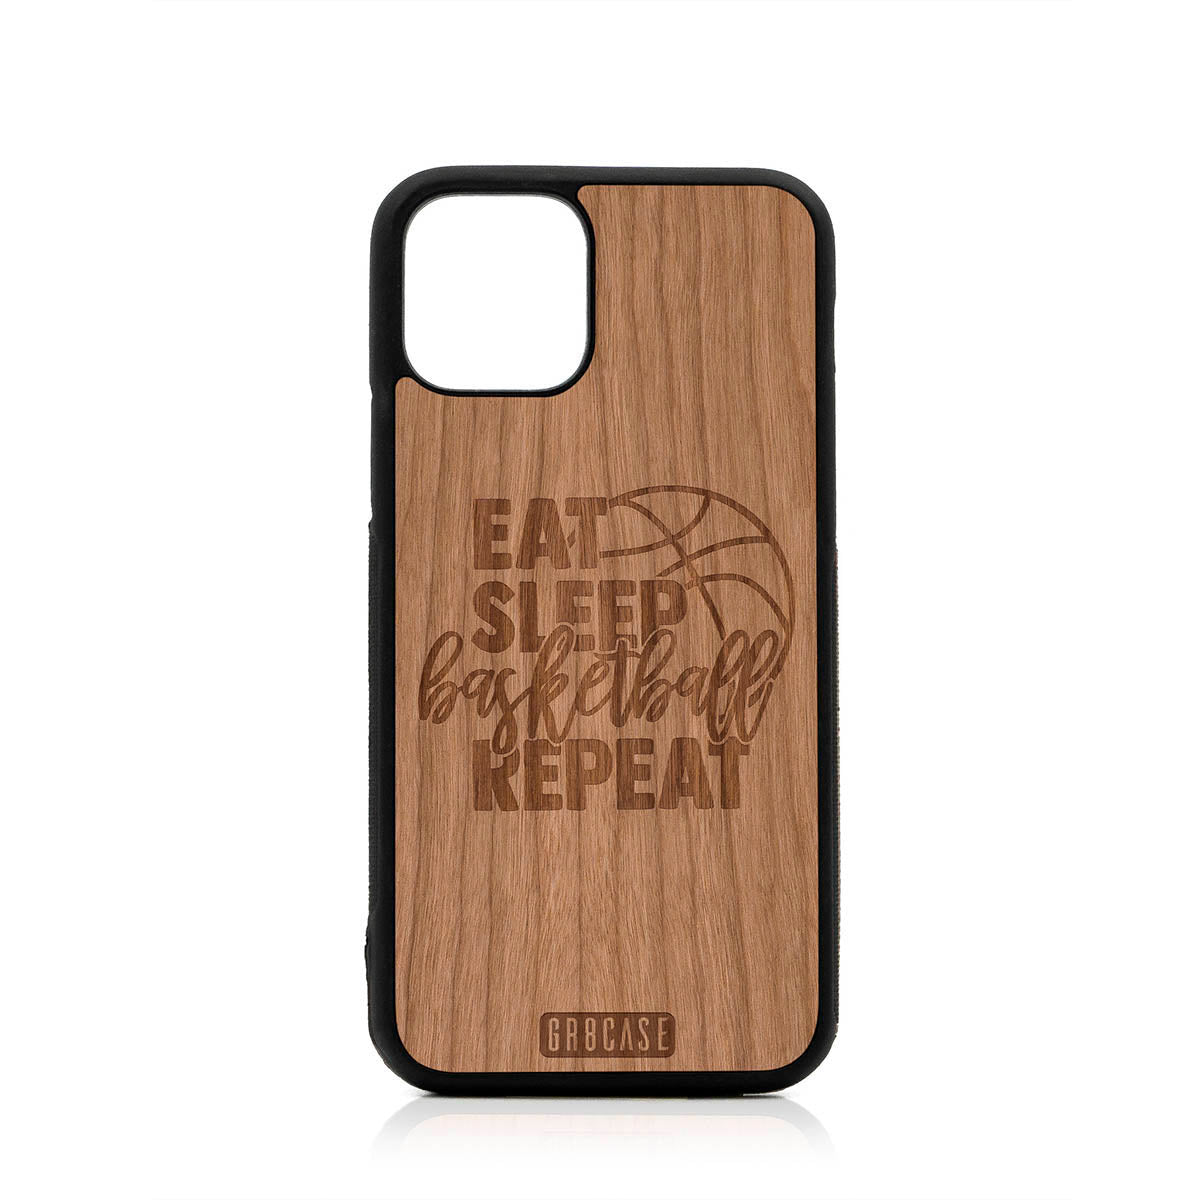 Eat Sleep Basketball Repeat Design Wood Case For iPhone 11 Pro